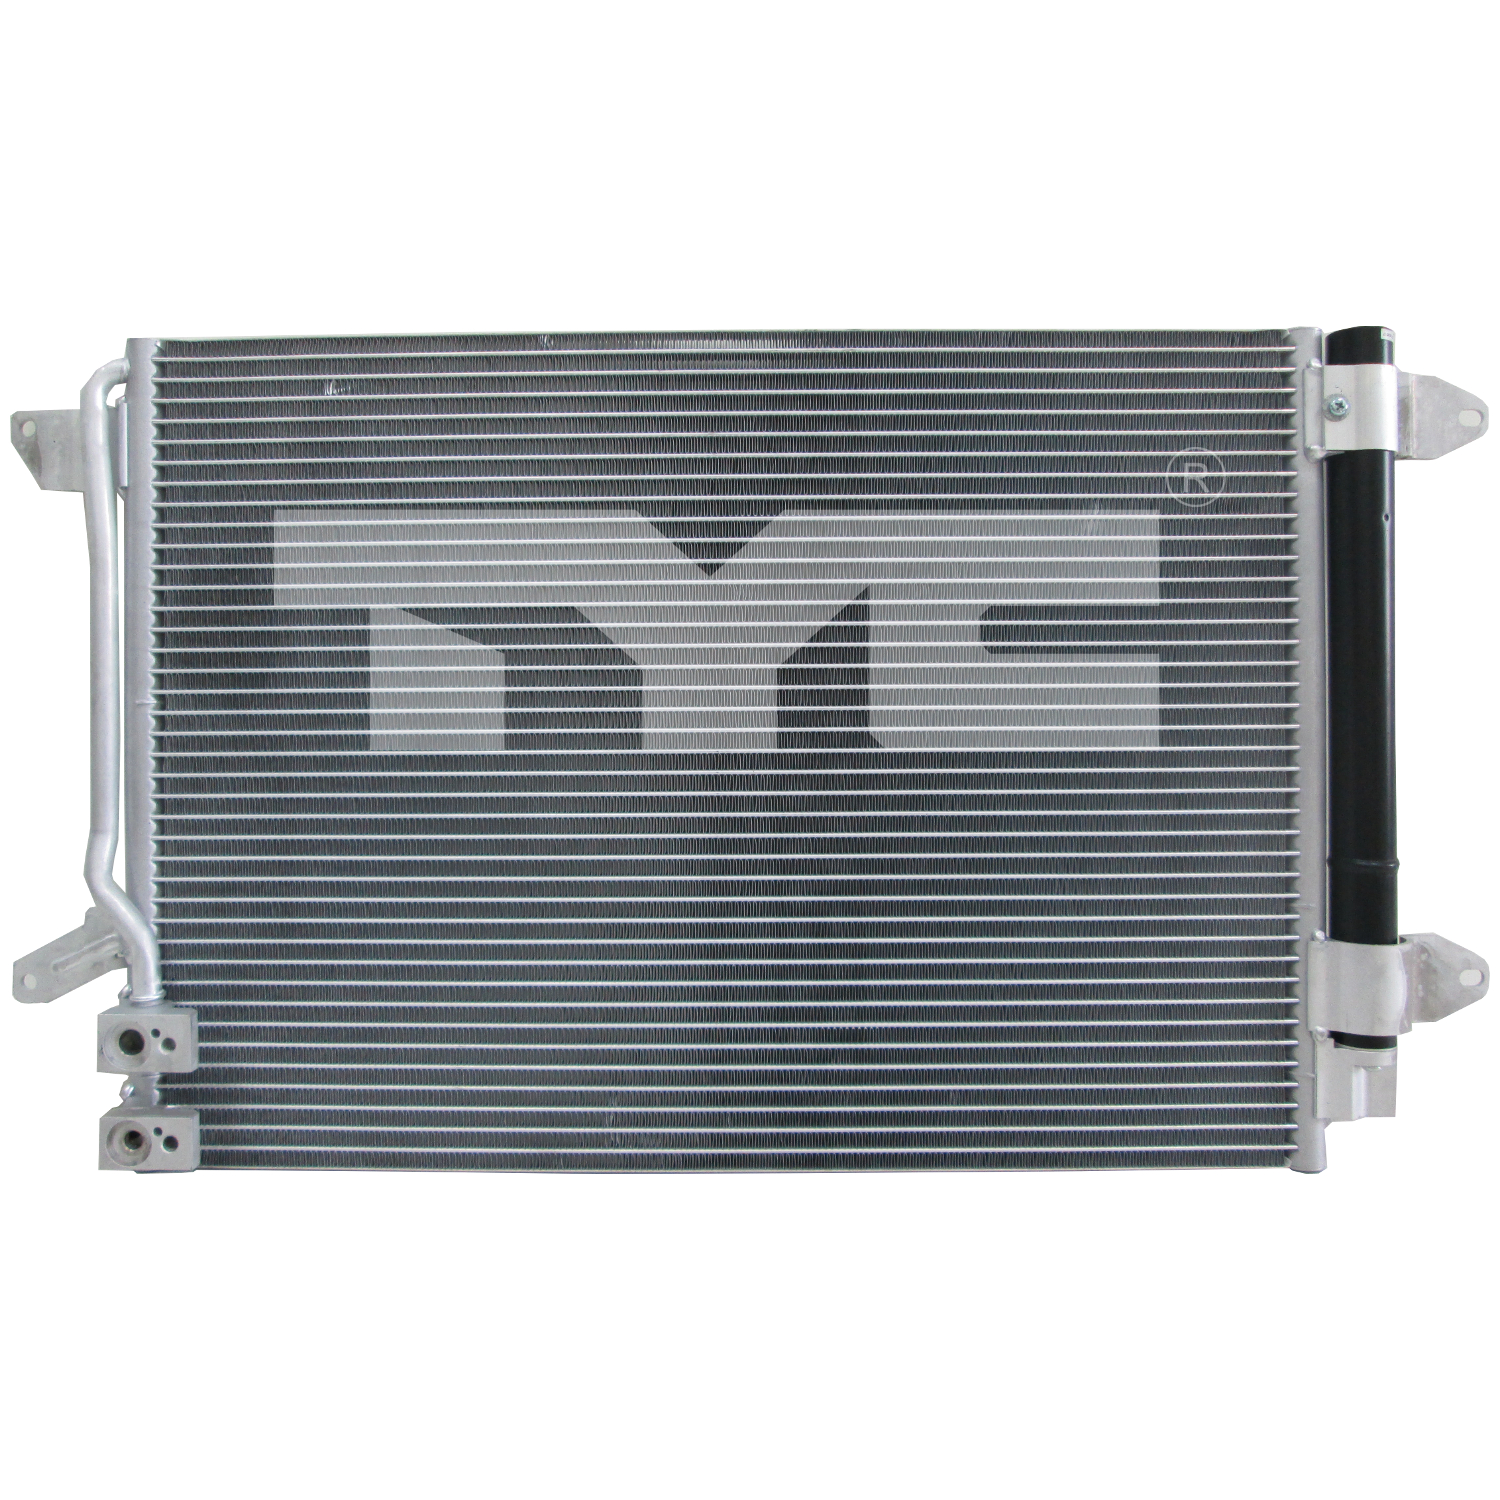 Aftermarket AC CONDENSERS for VOLKSWAGEN - BEETLE, BEETLE,16-19,Air conditioning condenser